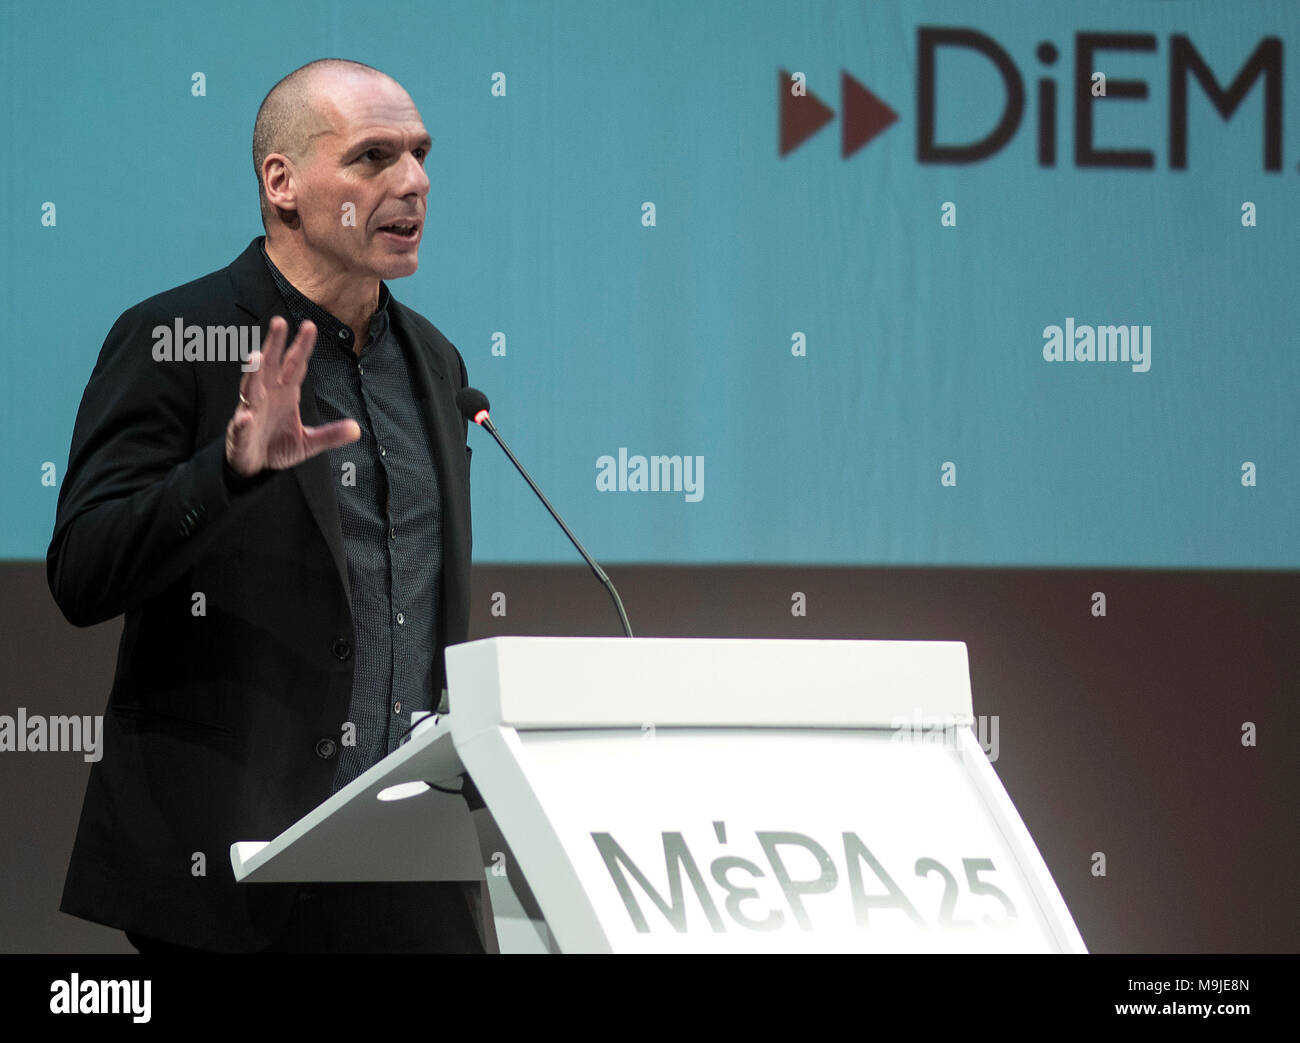 Athens, Greece. 26th Mar., 2018. Yanis Varoufakis, former Greek Finance Minister speaks to supporters  in Athens, Greece, on 26 March 2018. Varoufakis formally launched MeRA25 political party, as part of the pan-European political movement DiEM25, and will participate in Greece's next general elections. Credit: Elias Verdi/Alamy Live News Stock Photo